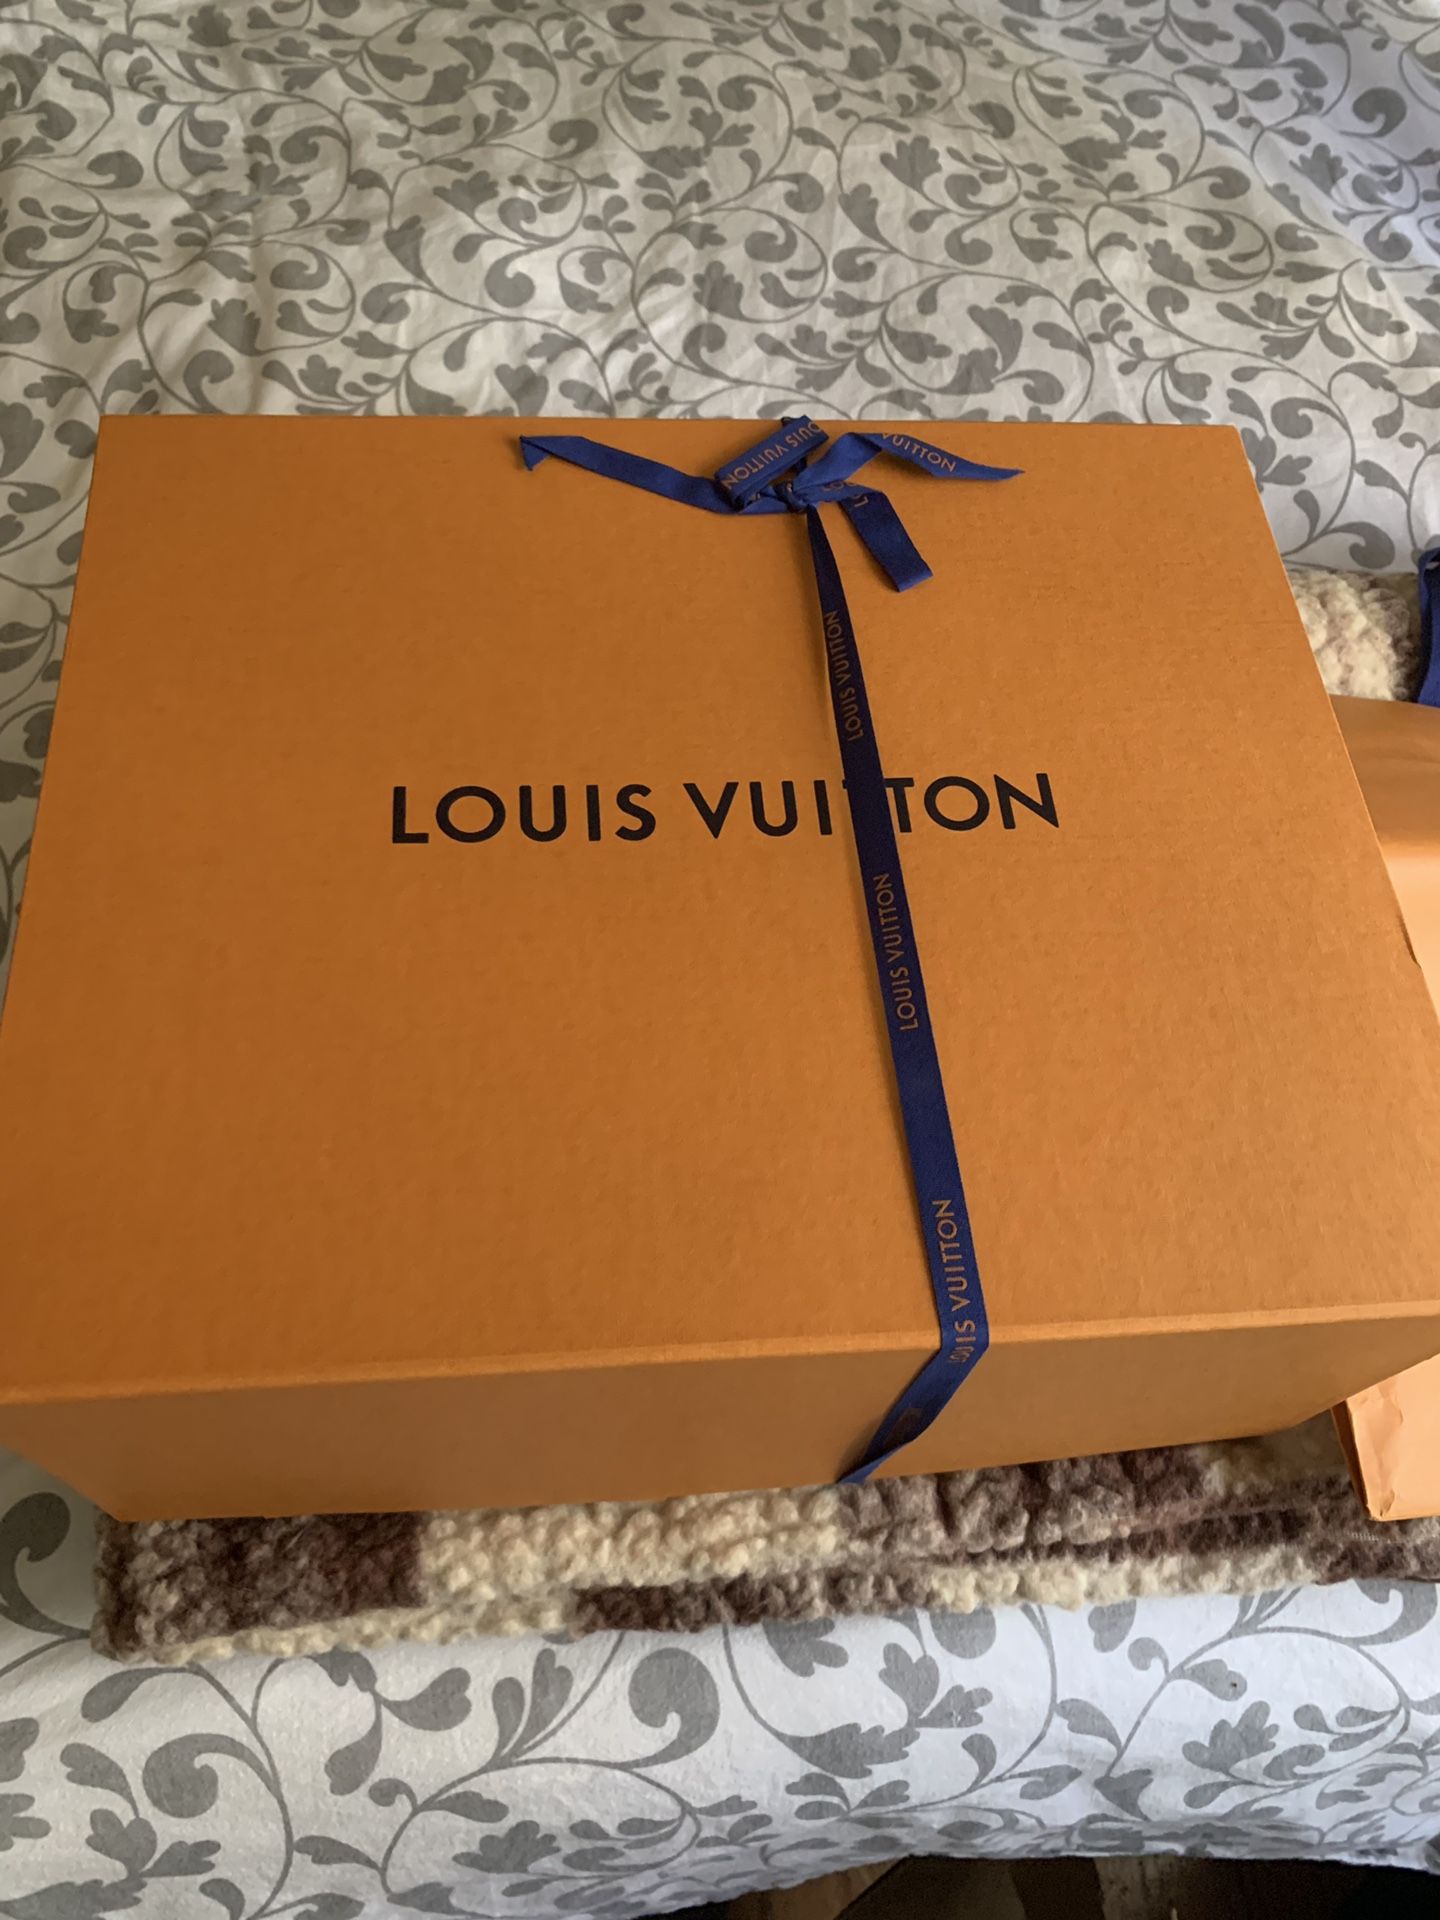 LOUIS VUITTON Néonoé champagne bag - LIKE NEW used once